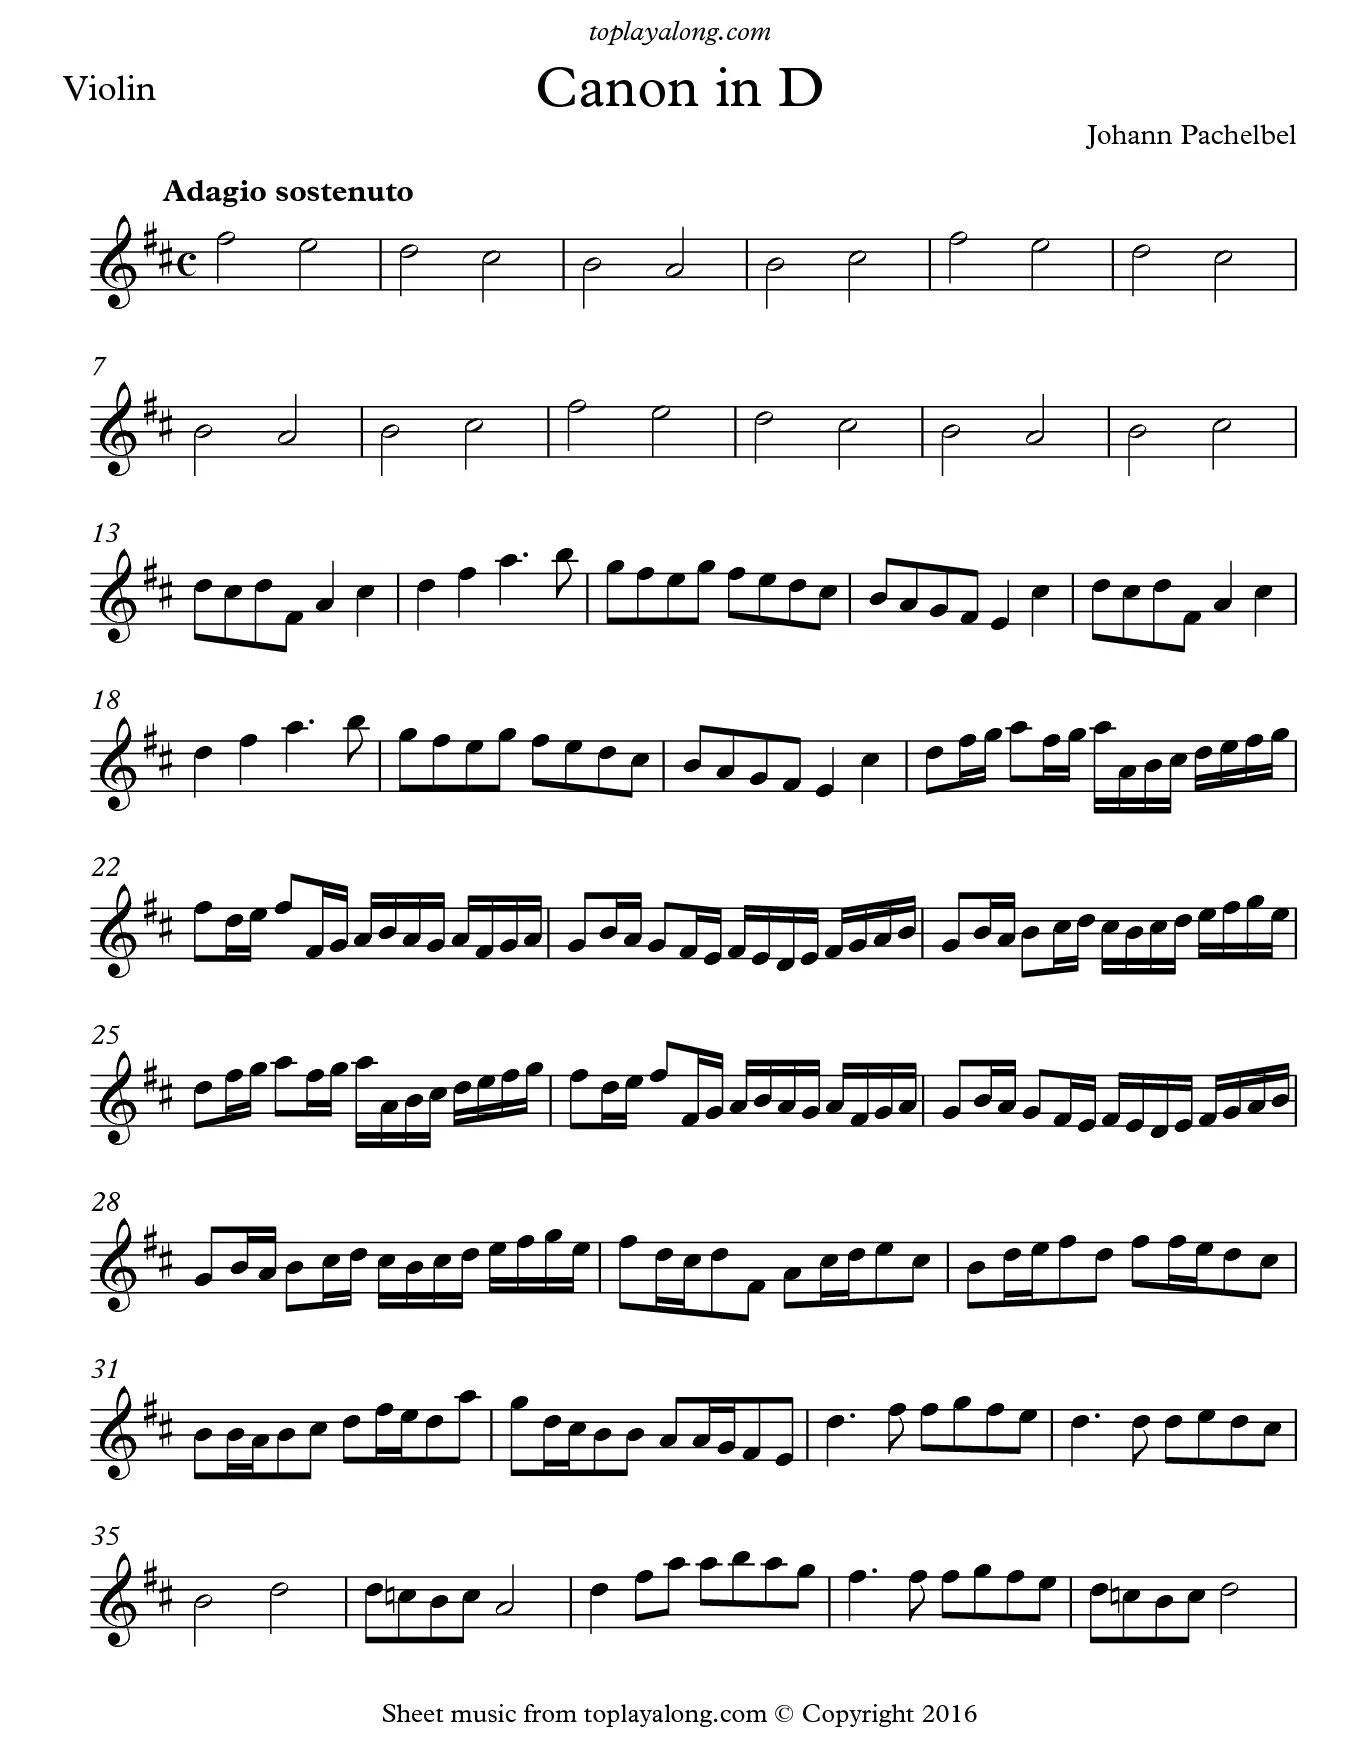 canon in d mayor violin sheet - What grade is canon in D major